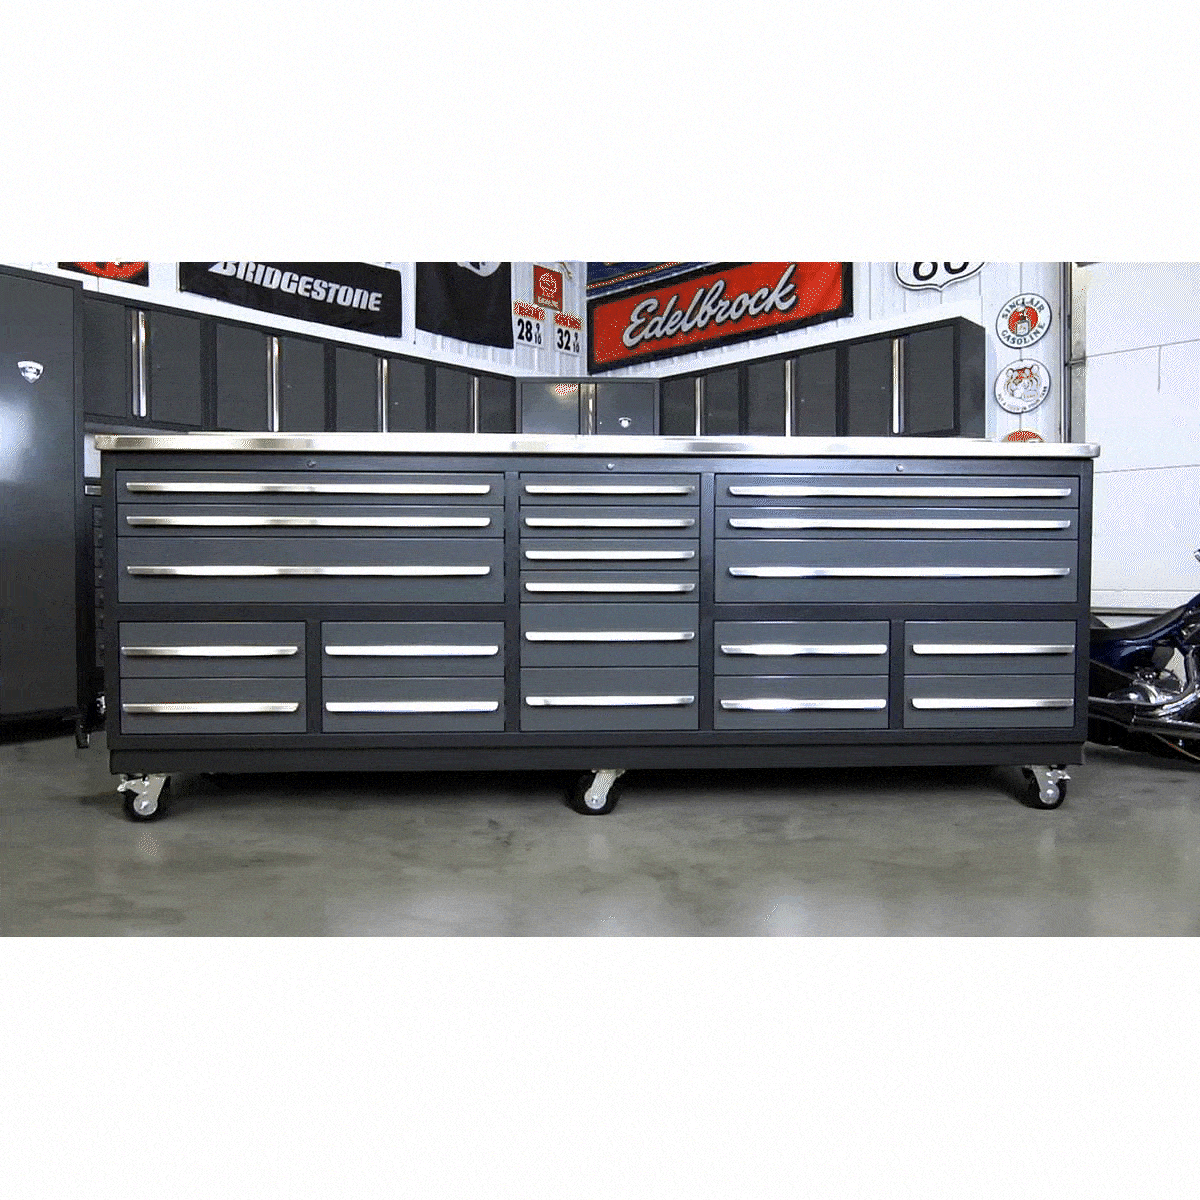 NEW 22-Drawer Rolling Tool Box / Tool Cabinet with Swappable Drawers